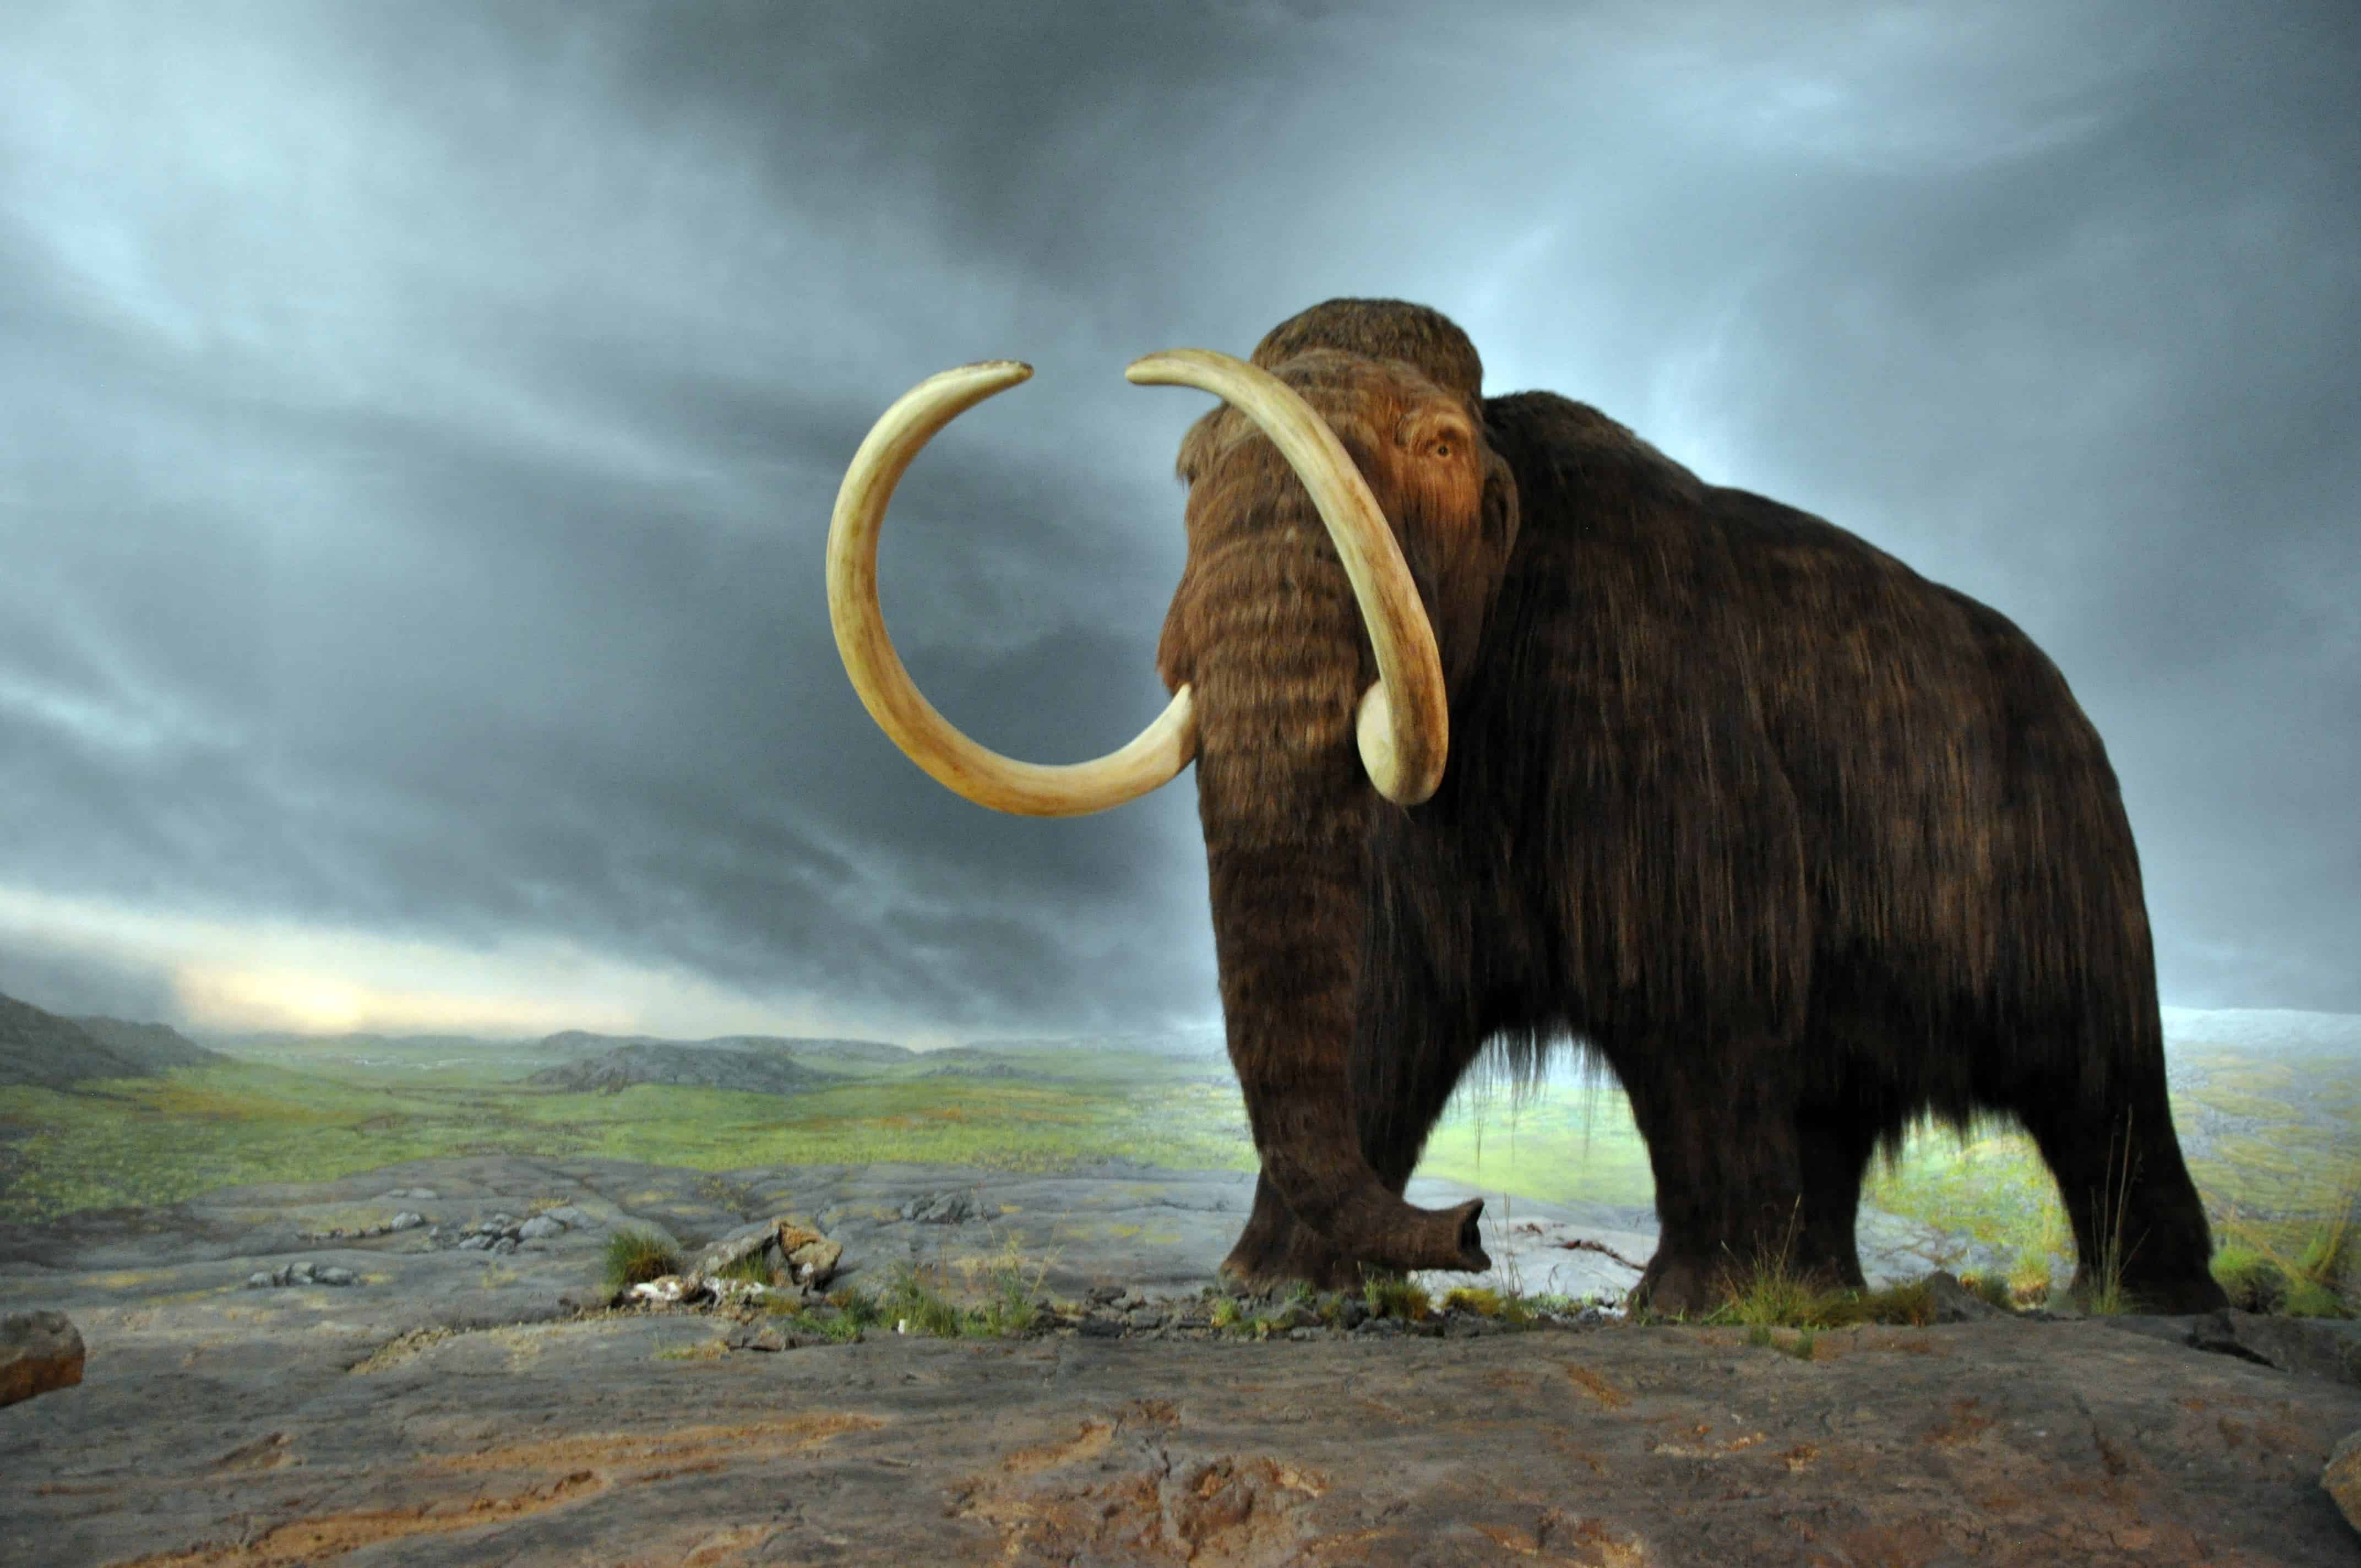 Can the mammoth make a come-back..and should it? Image credits: Flying Puffin